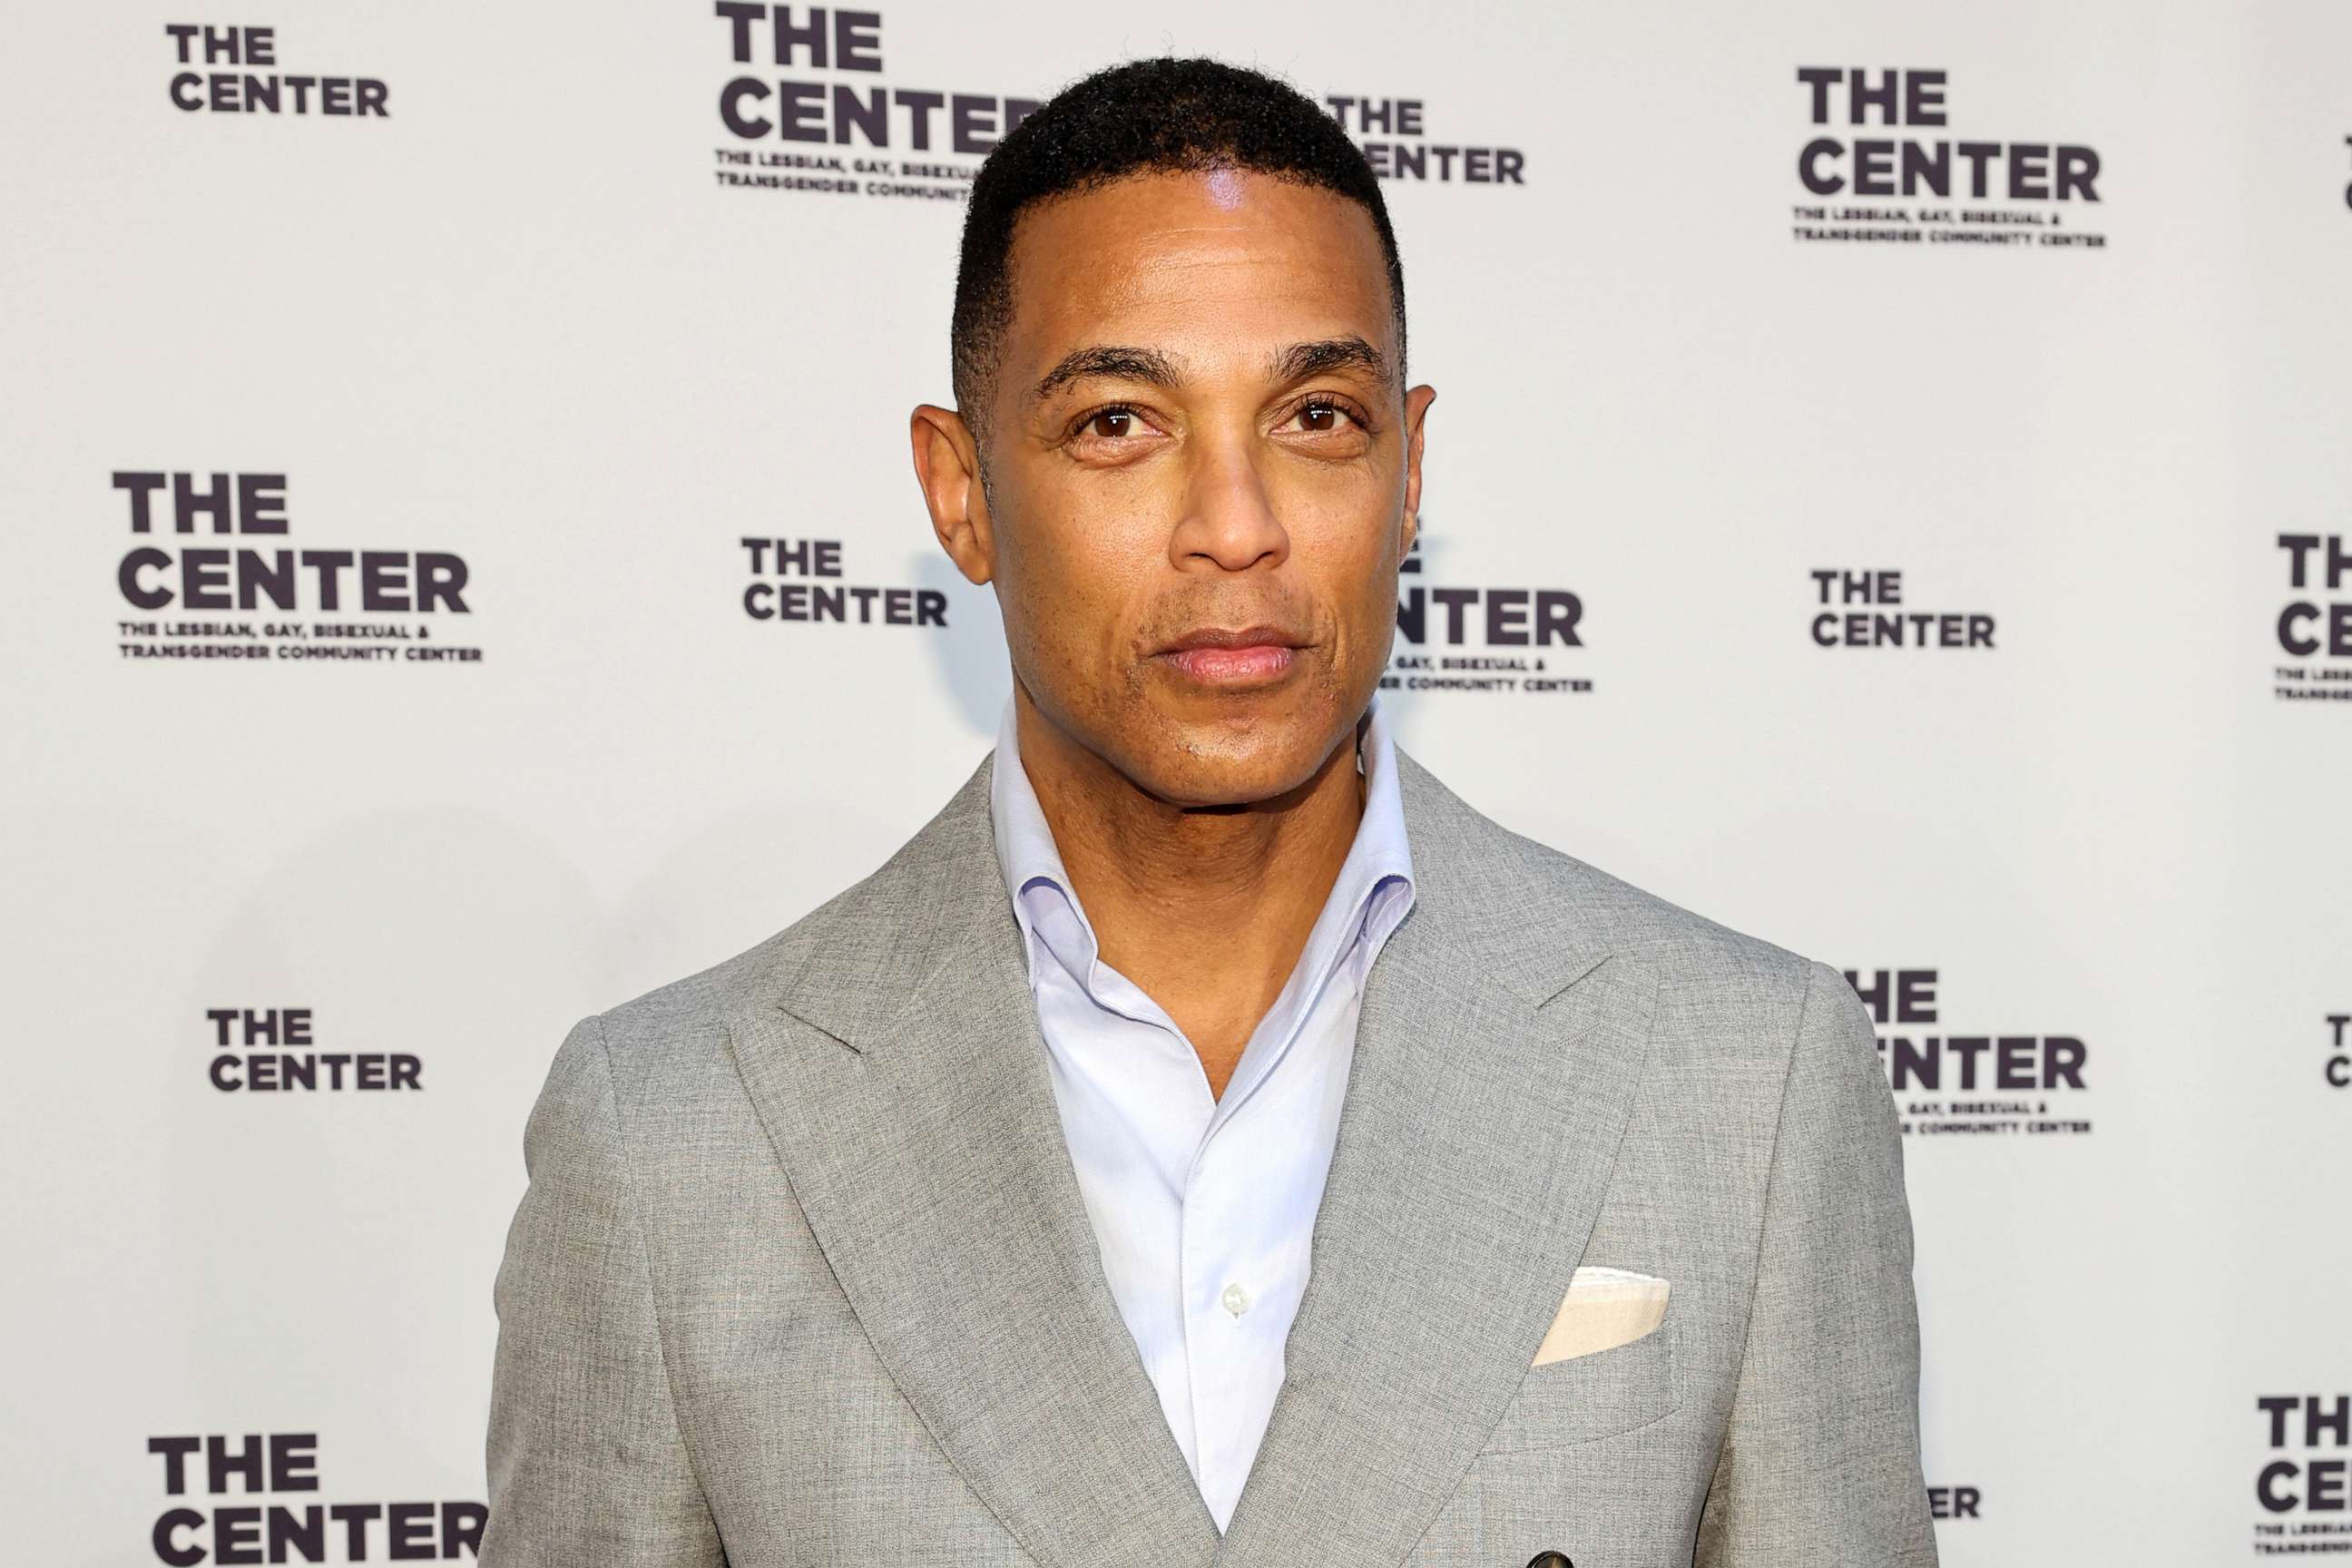 PHOTO: Don Lemon attends the 2023 Center Dinner at Cipriani Wall Street on April 13, 2023 in New York City.